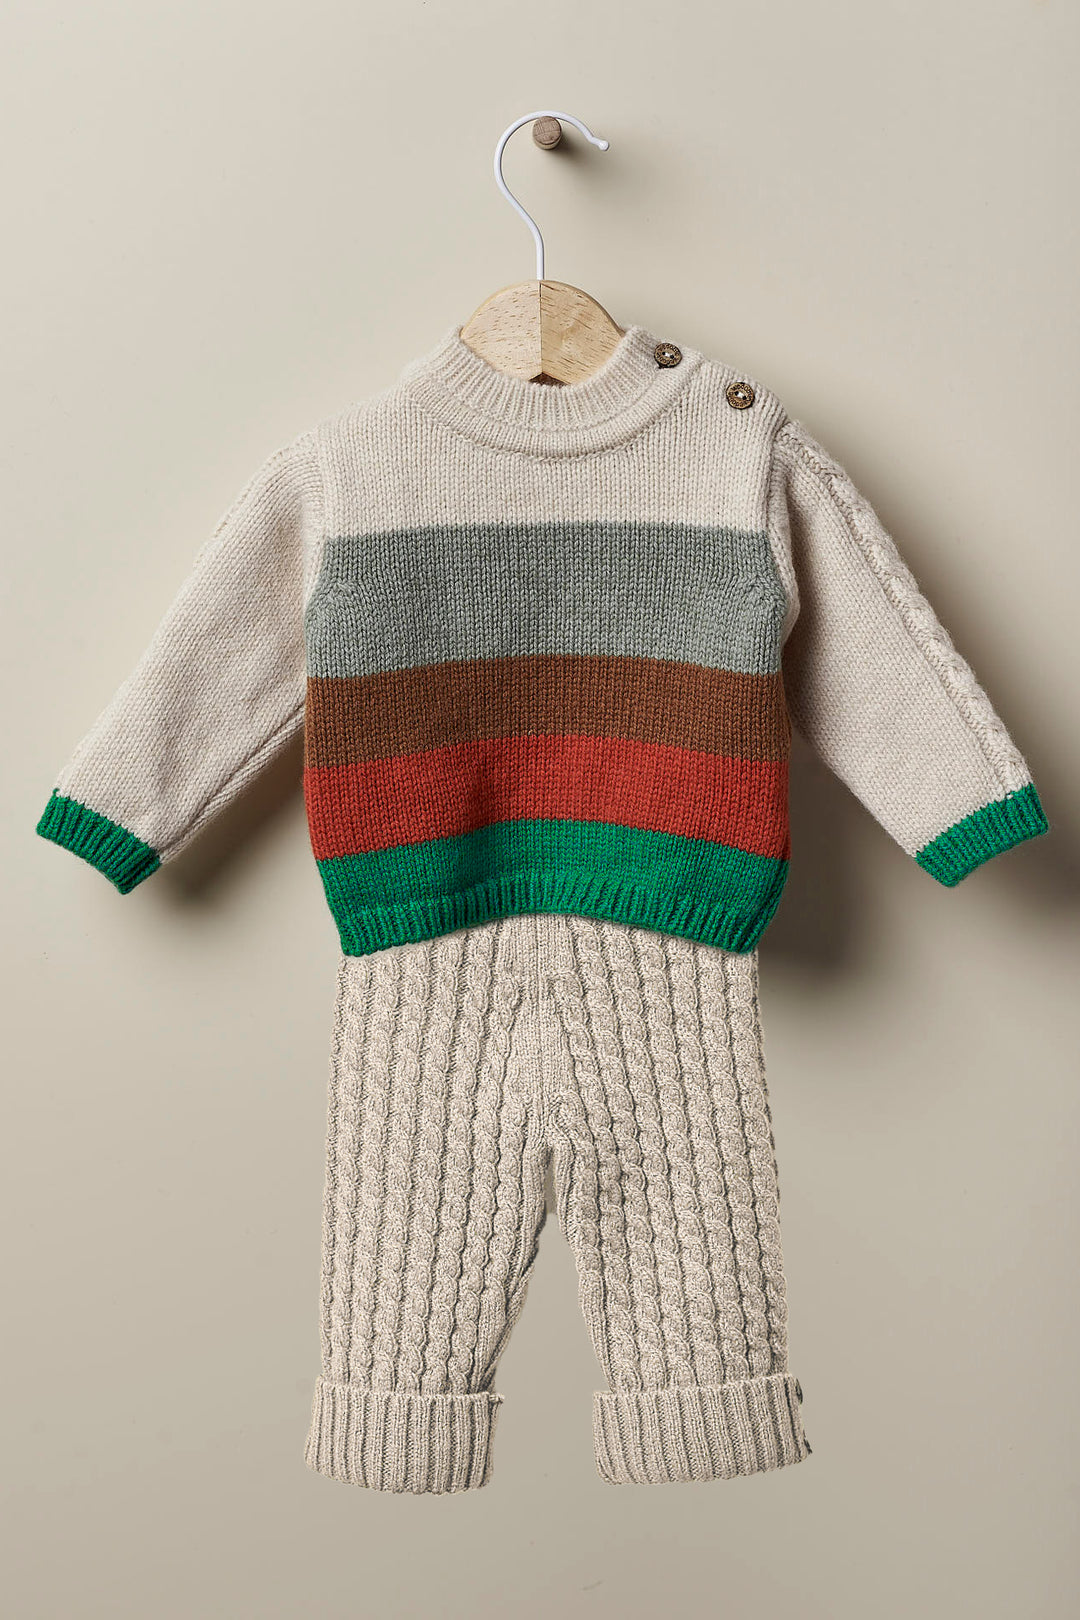 Wedoble "Cristiano" Beige & Green Stripe Cashmere Knit Top & Trousers | Millie and John